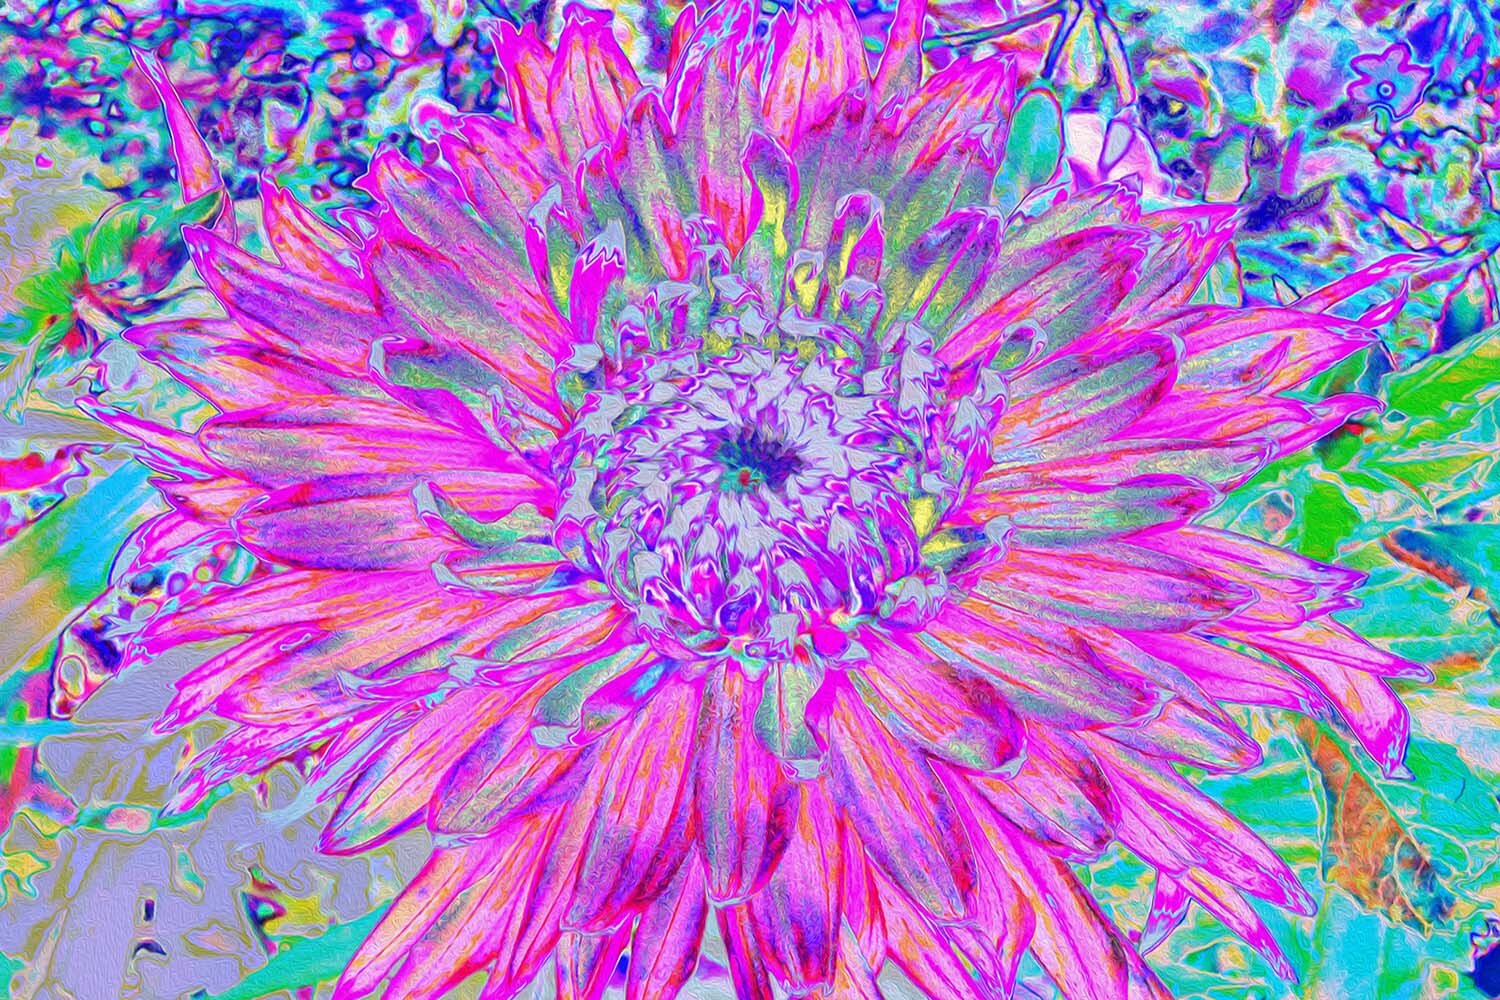 Cool Pink, Blue and Purple Cactus Dahlia Explosion